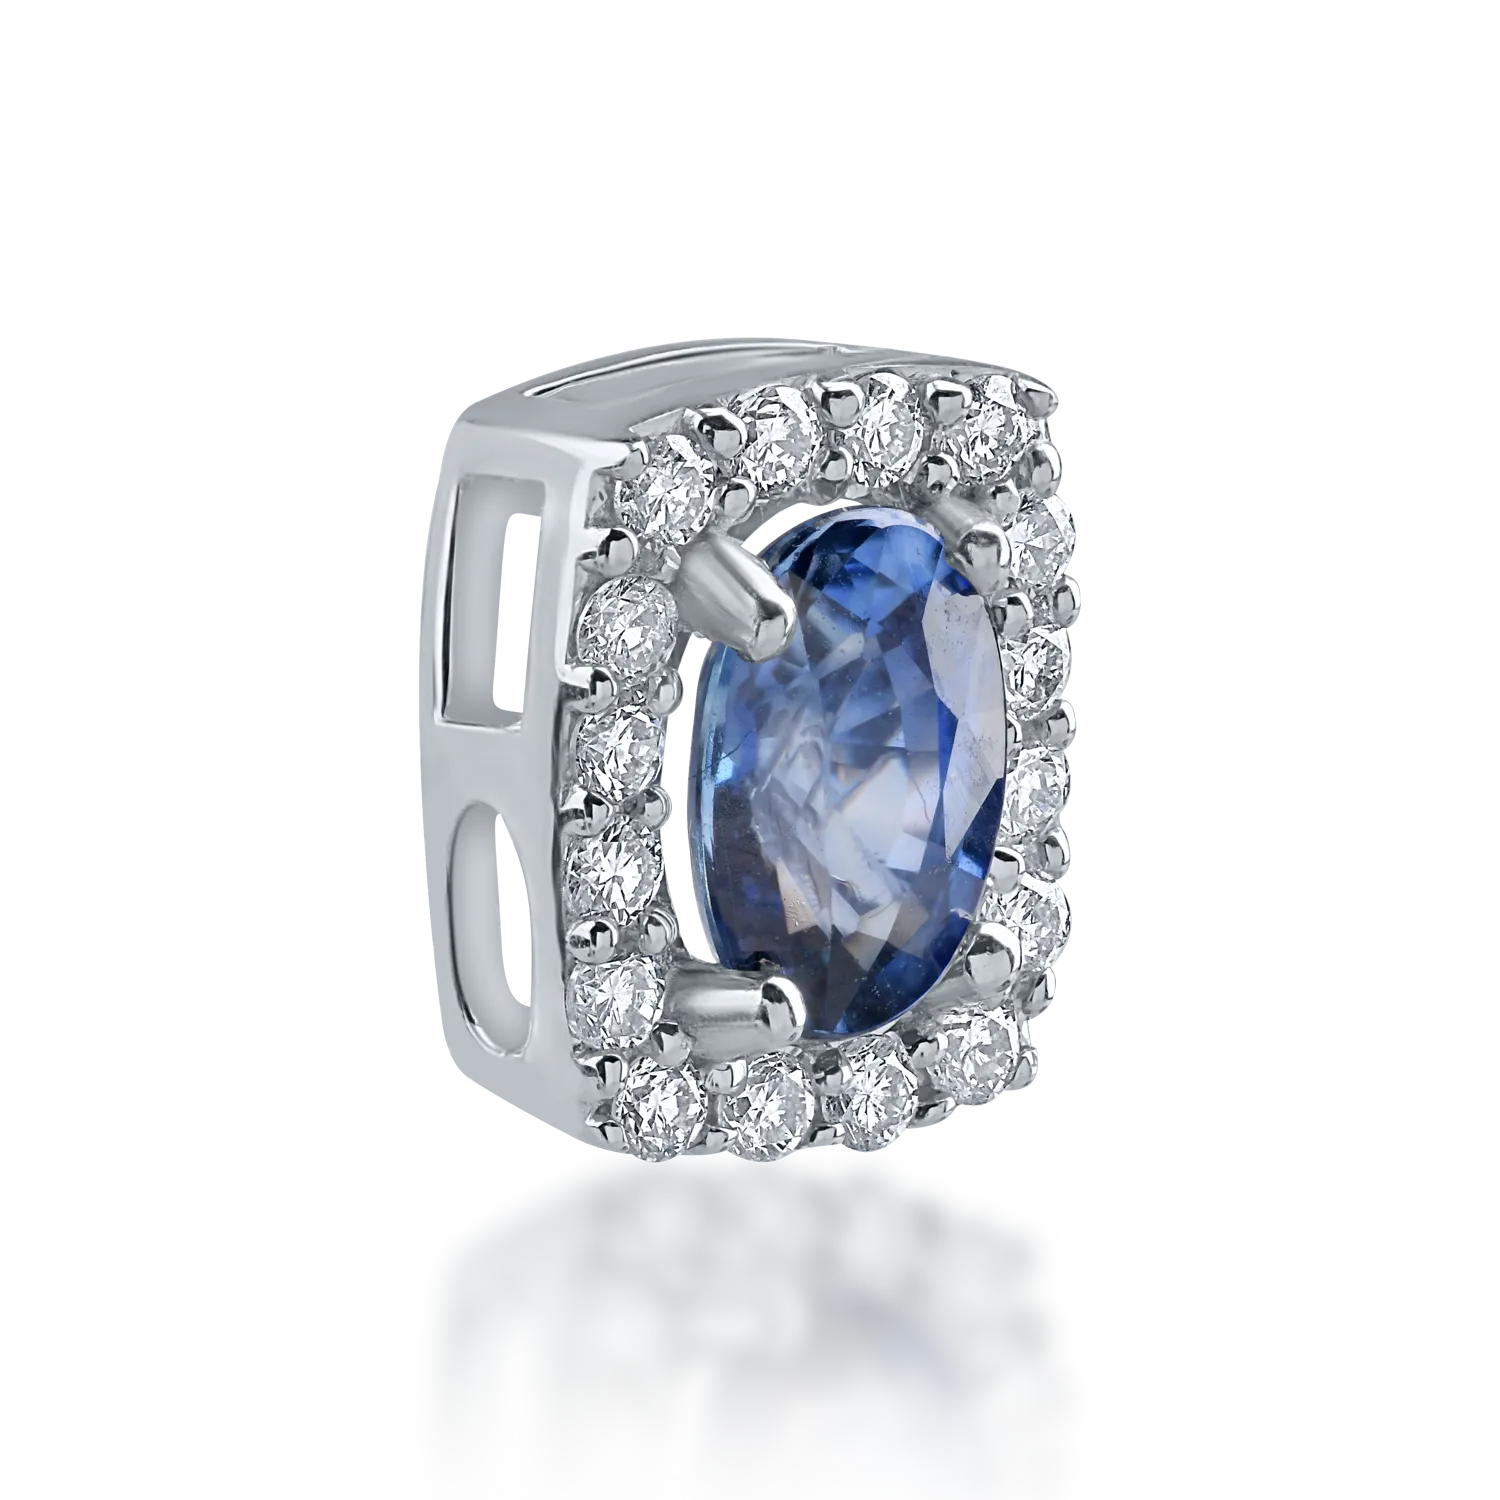 White gold pendant with 0.57ct sapphire and 0.11ct diamonds